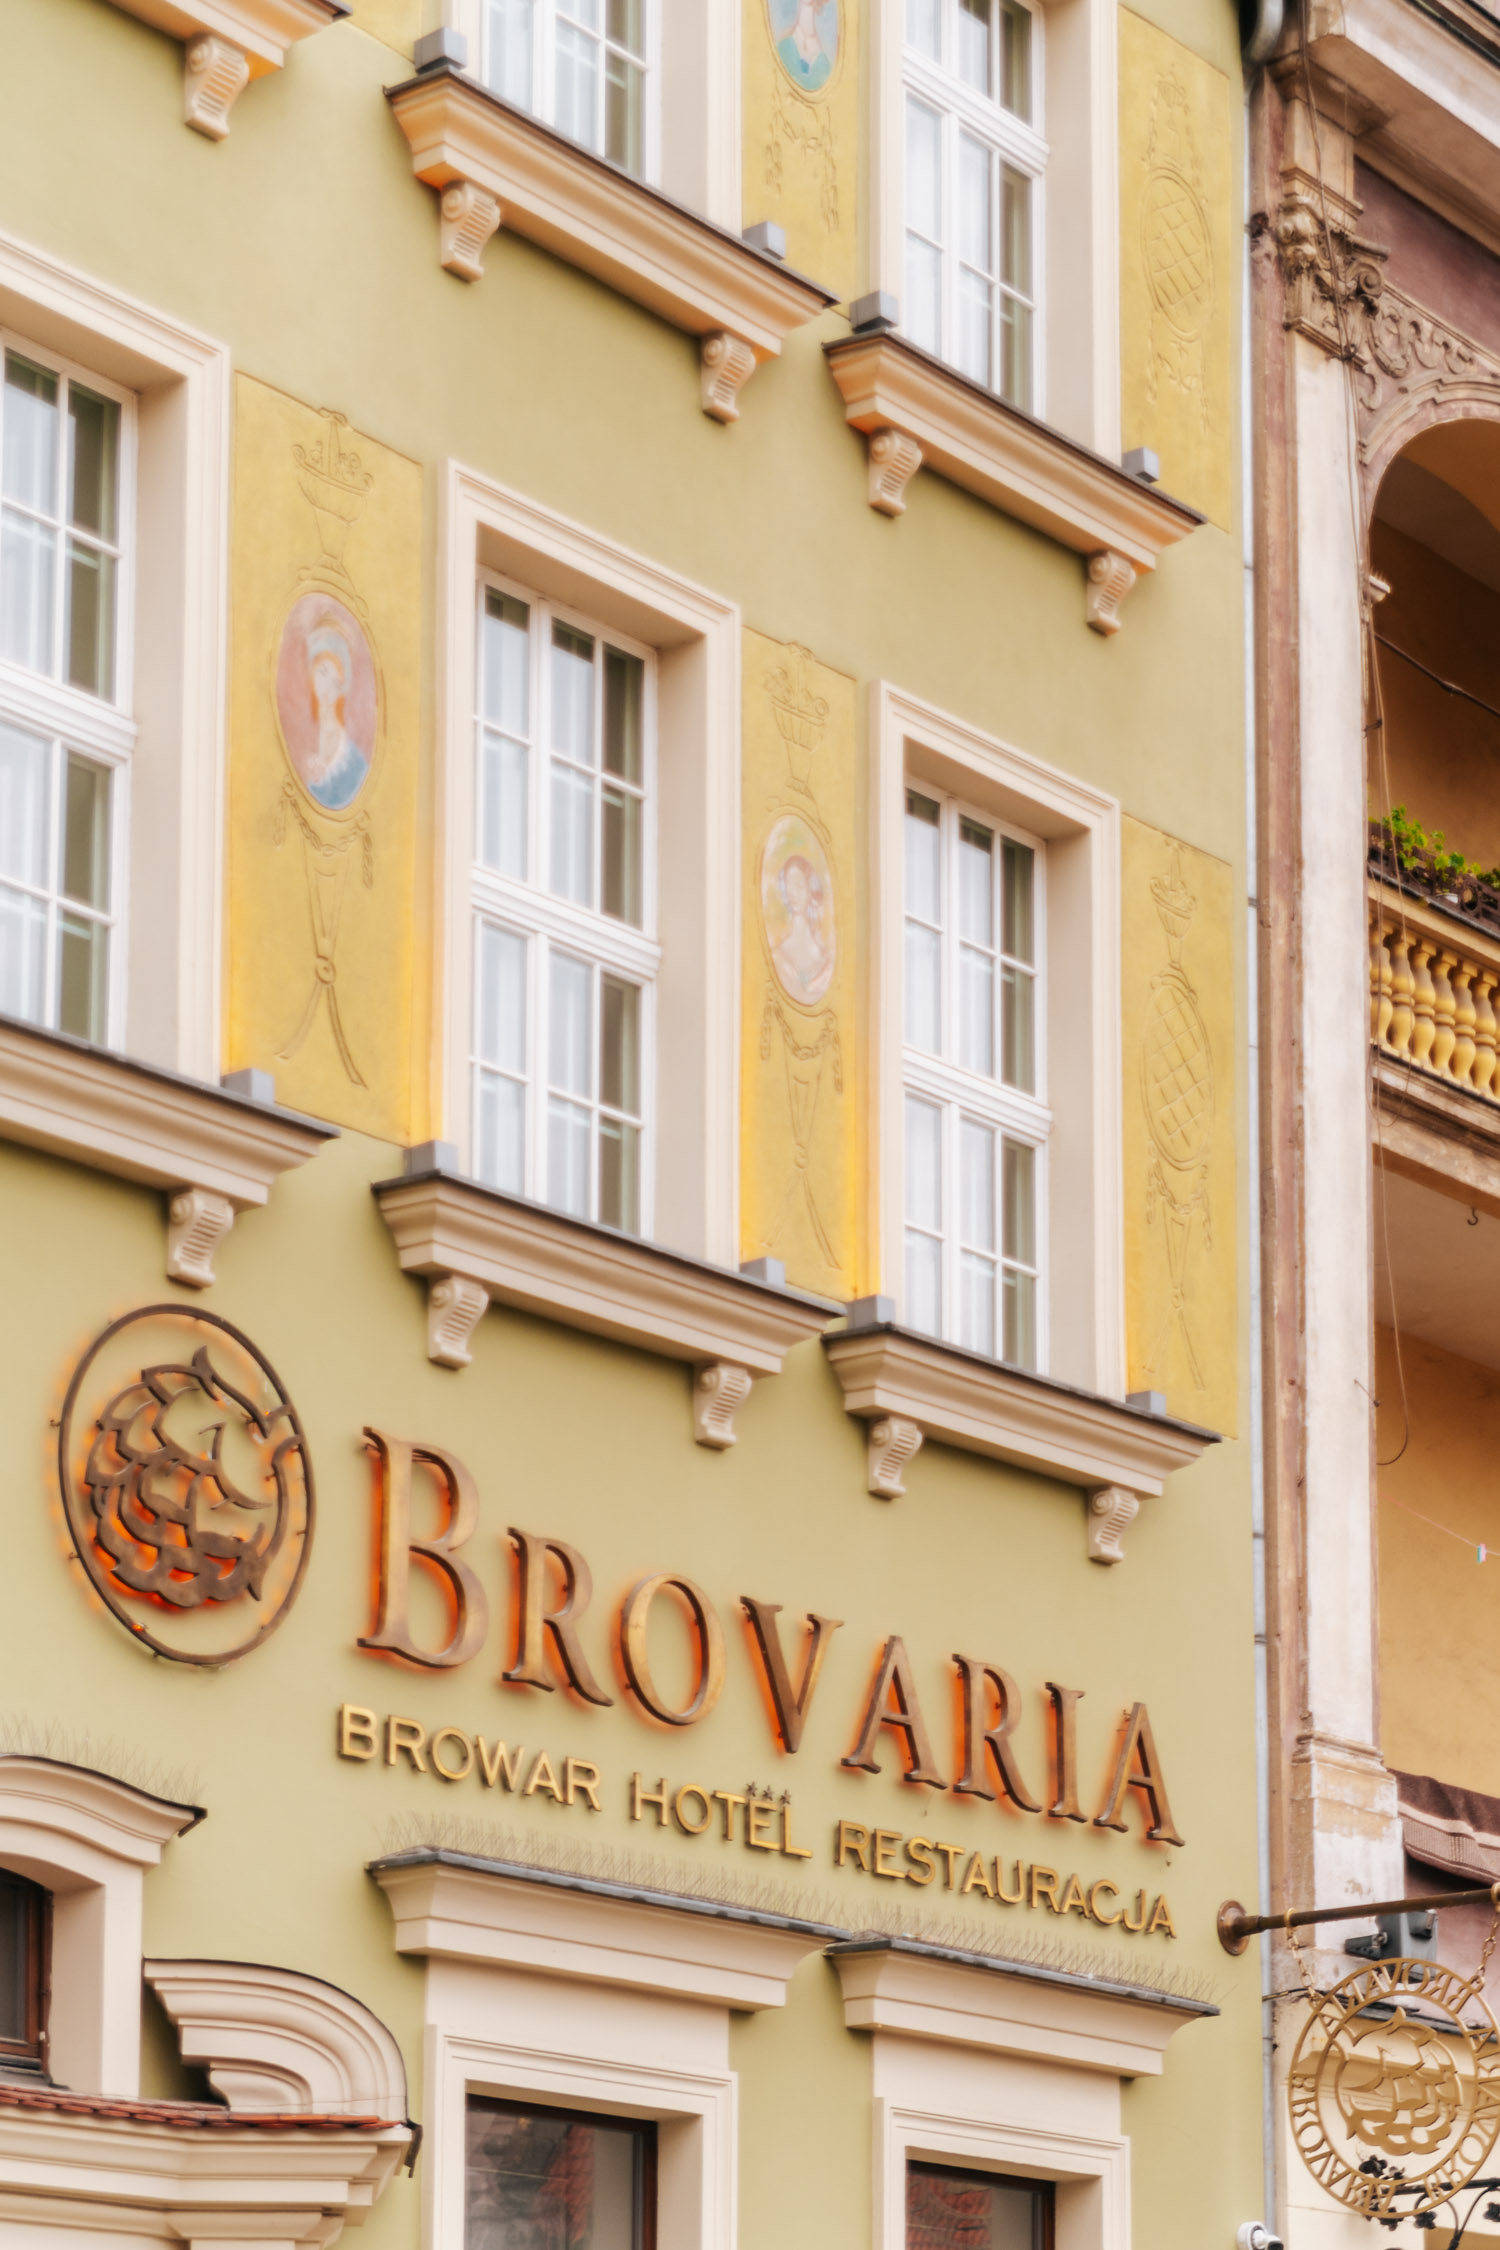 Brovaria restaurant brewery, The Old Town.